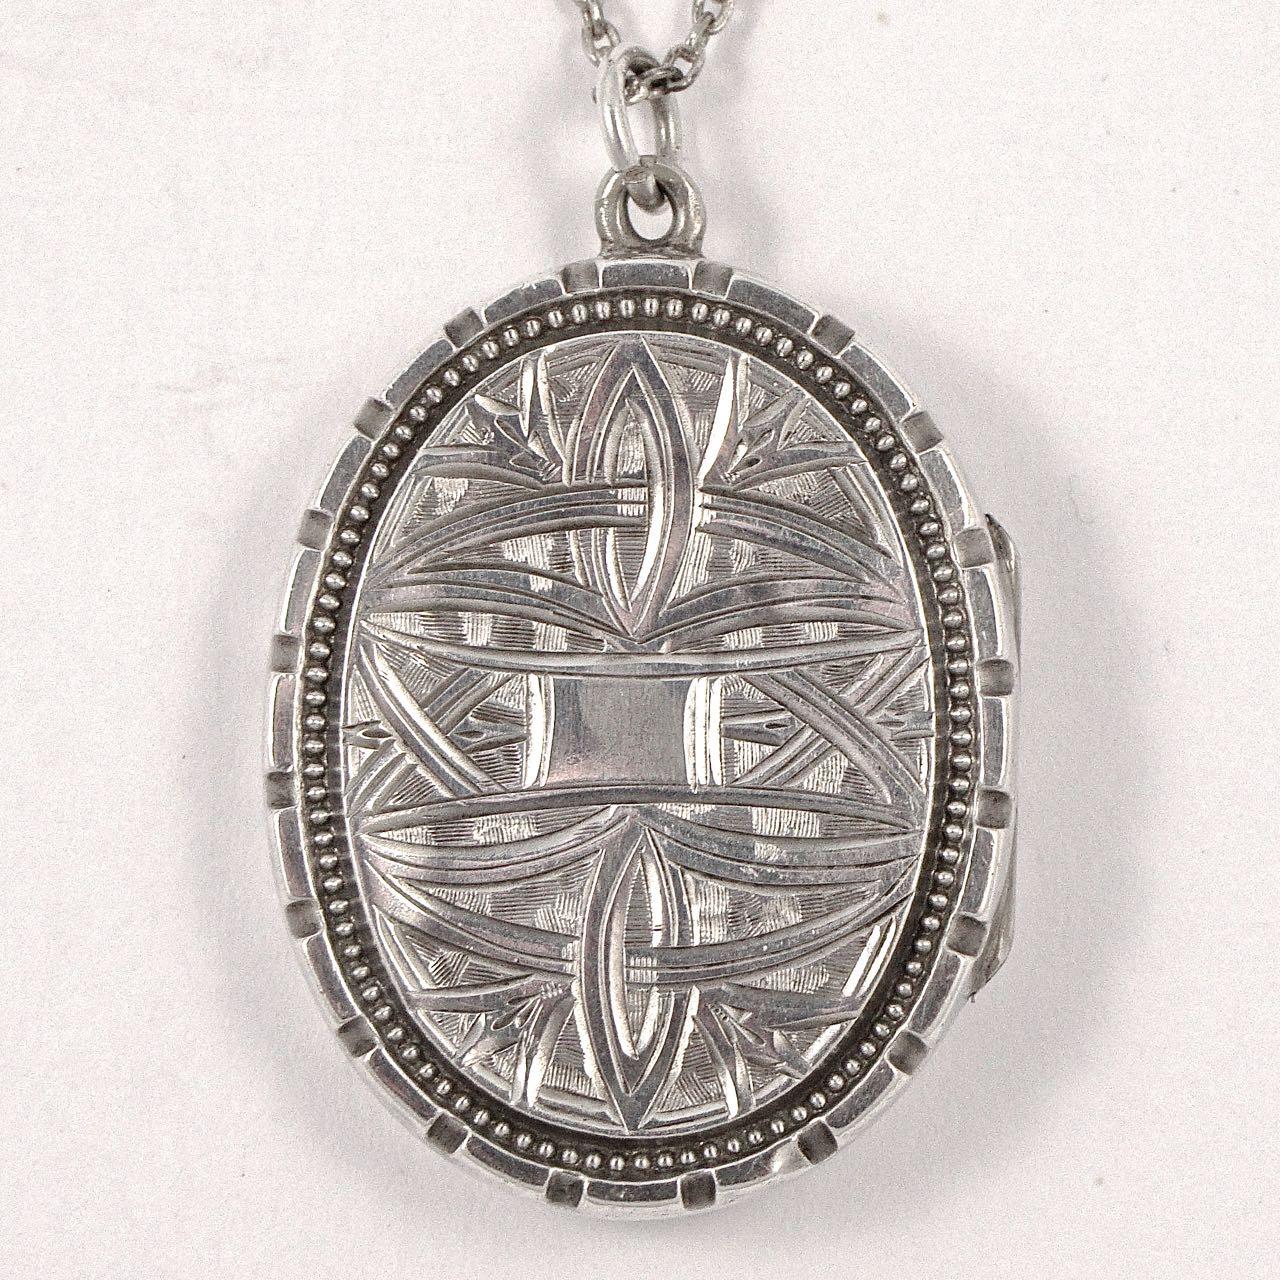 Large Ornate Detail Sterling Silver Victorian Style Photo Locket